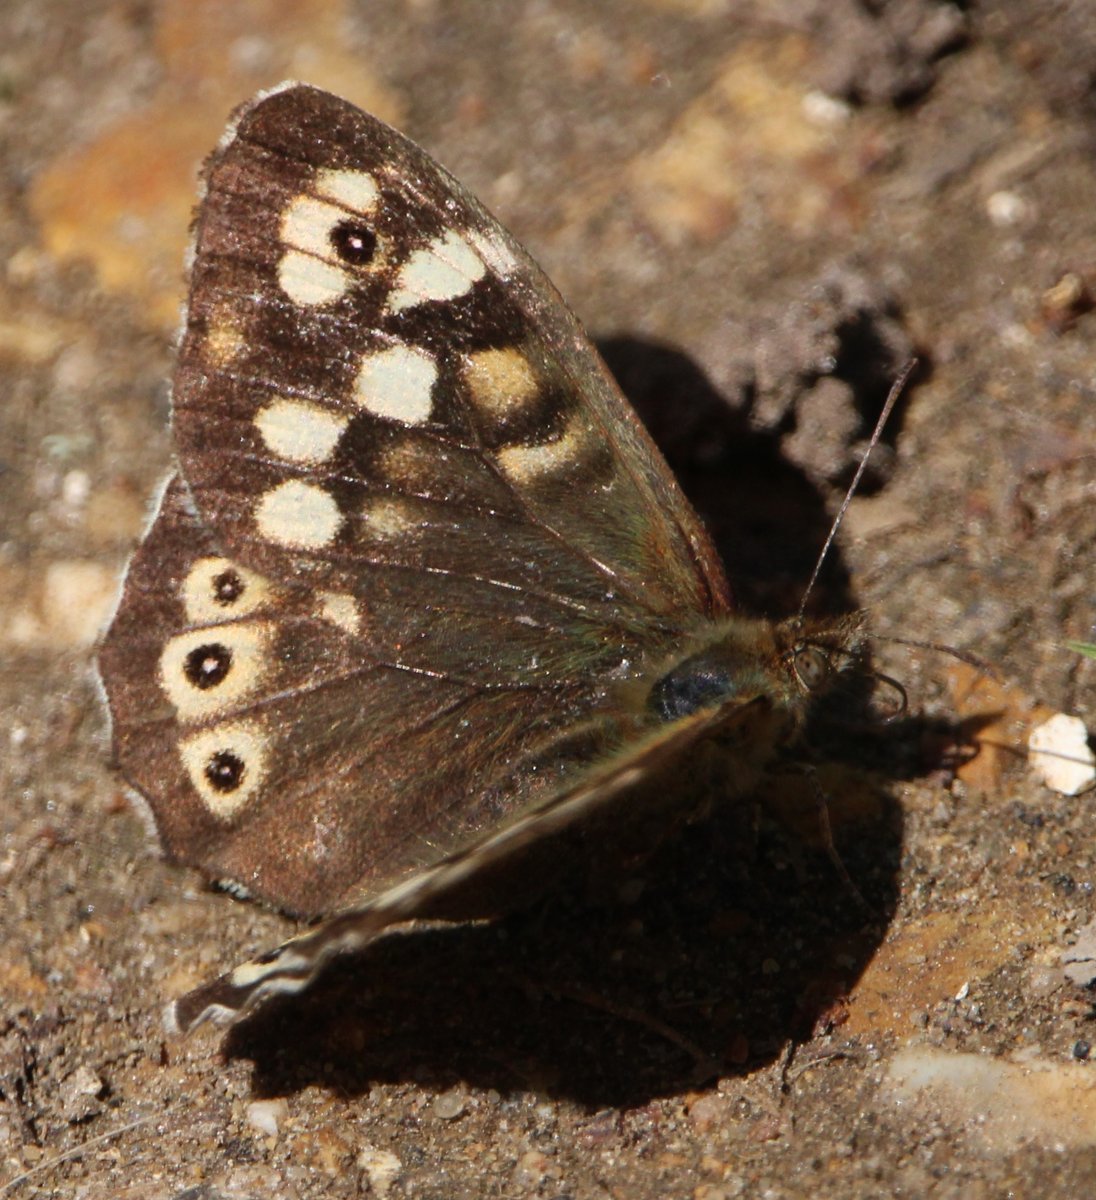 We had beaches (w. #VitaminSea), birds, beetles, and butterflies (our first speckled wood of the year) on our walk @LymKeyRanger today + bread (at our lagoon side soup lunch spot). Lovely day at an excellent destination.